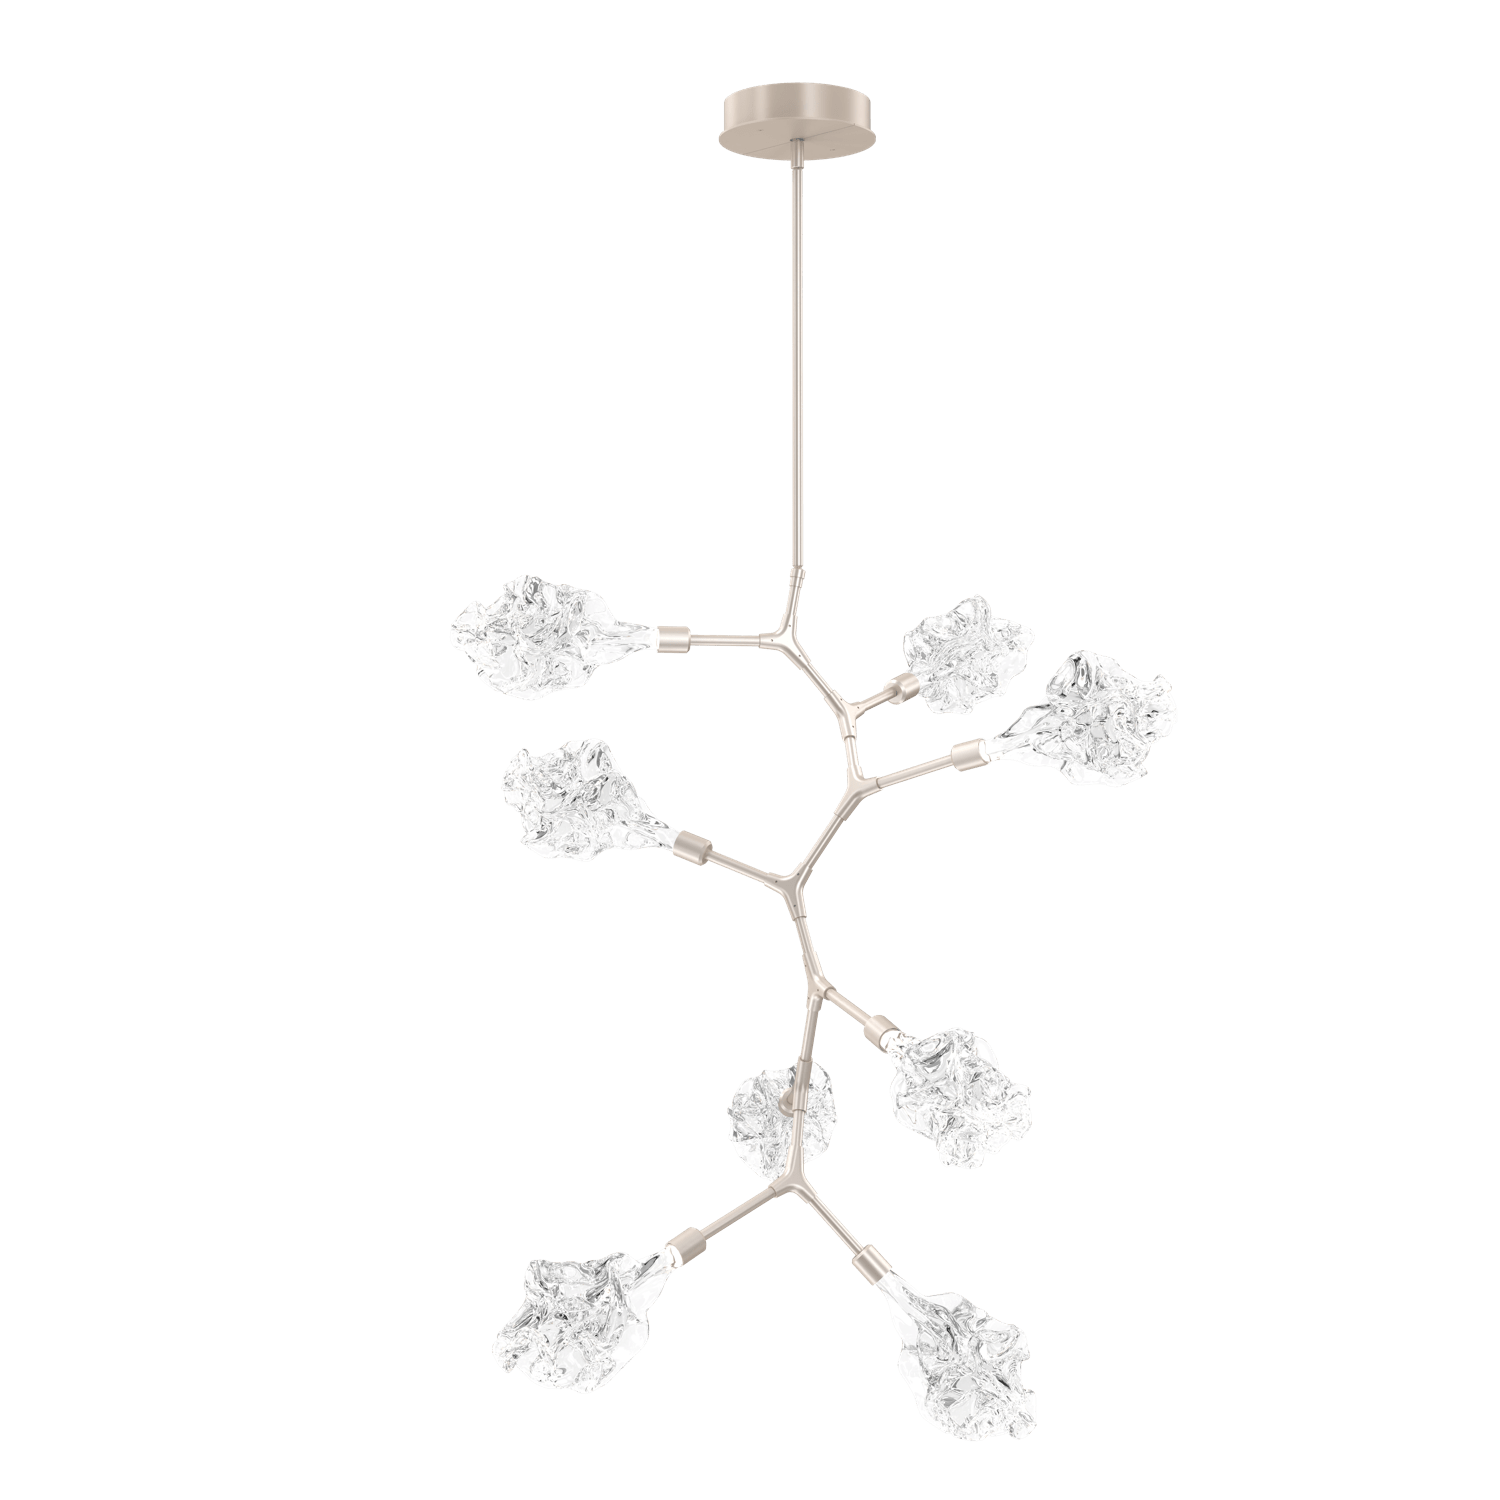 CHB0059-VB-BS-Hammerton-Studio-Blossom-8-light-organic-vine-chandelier-with-metallic-beige-silver-finish-and-clear-handblown-crystal-glass-shades-and-LED-lamping